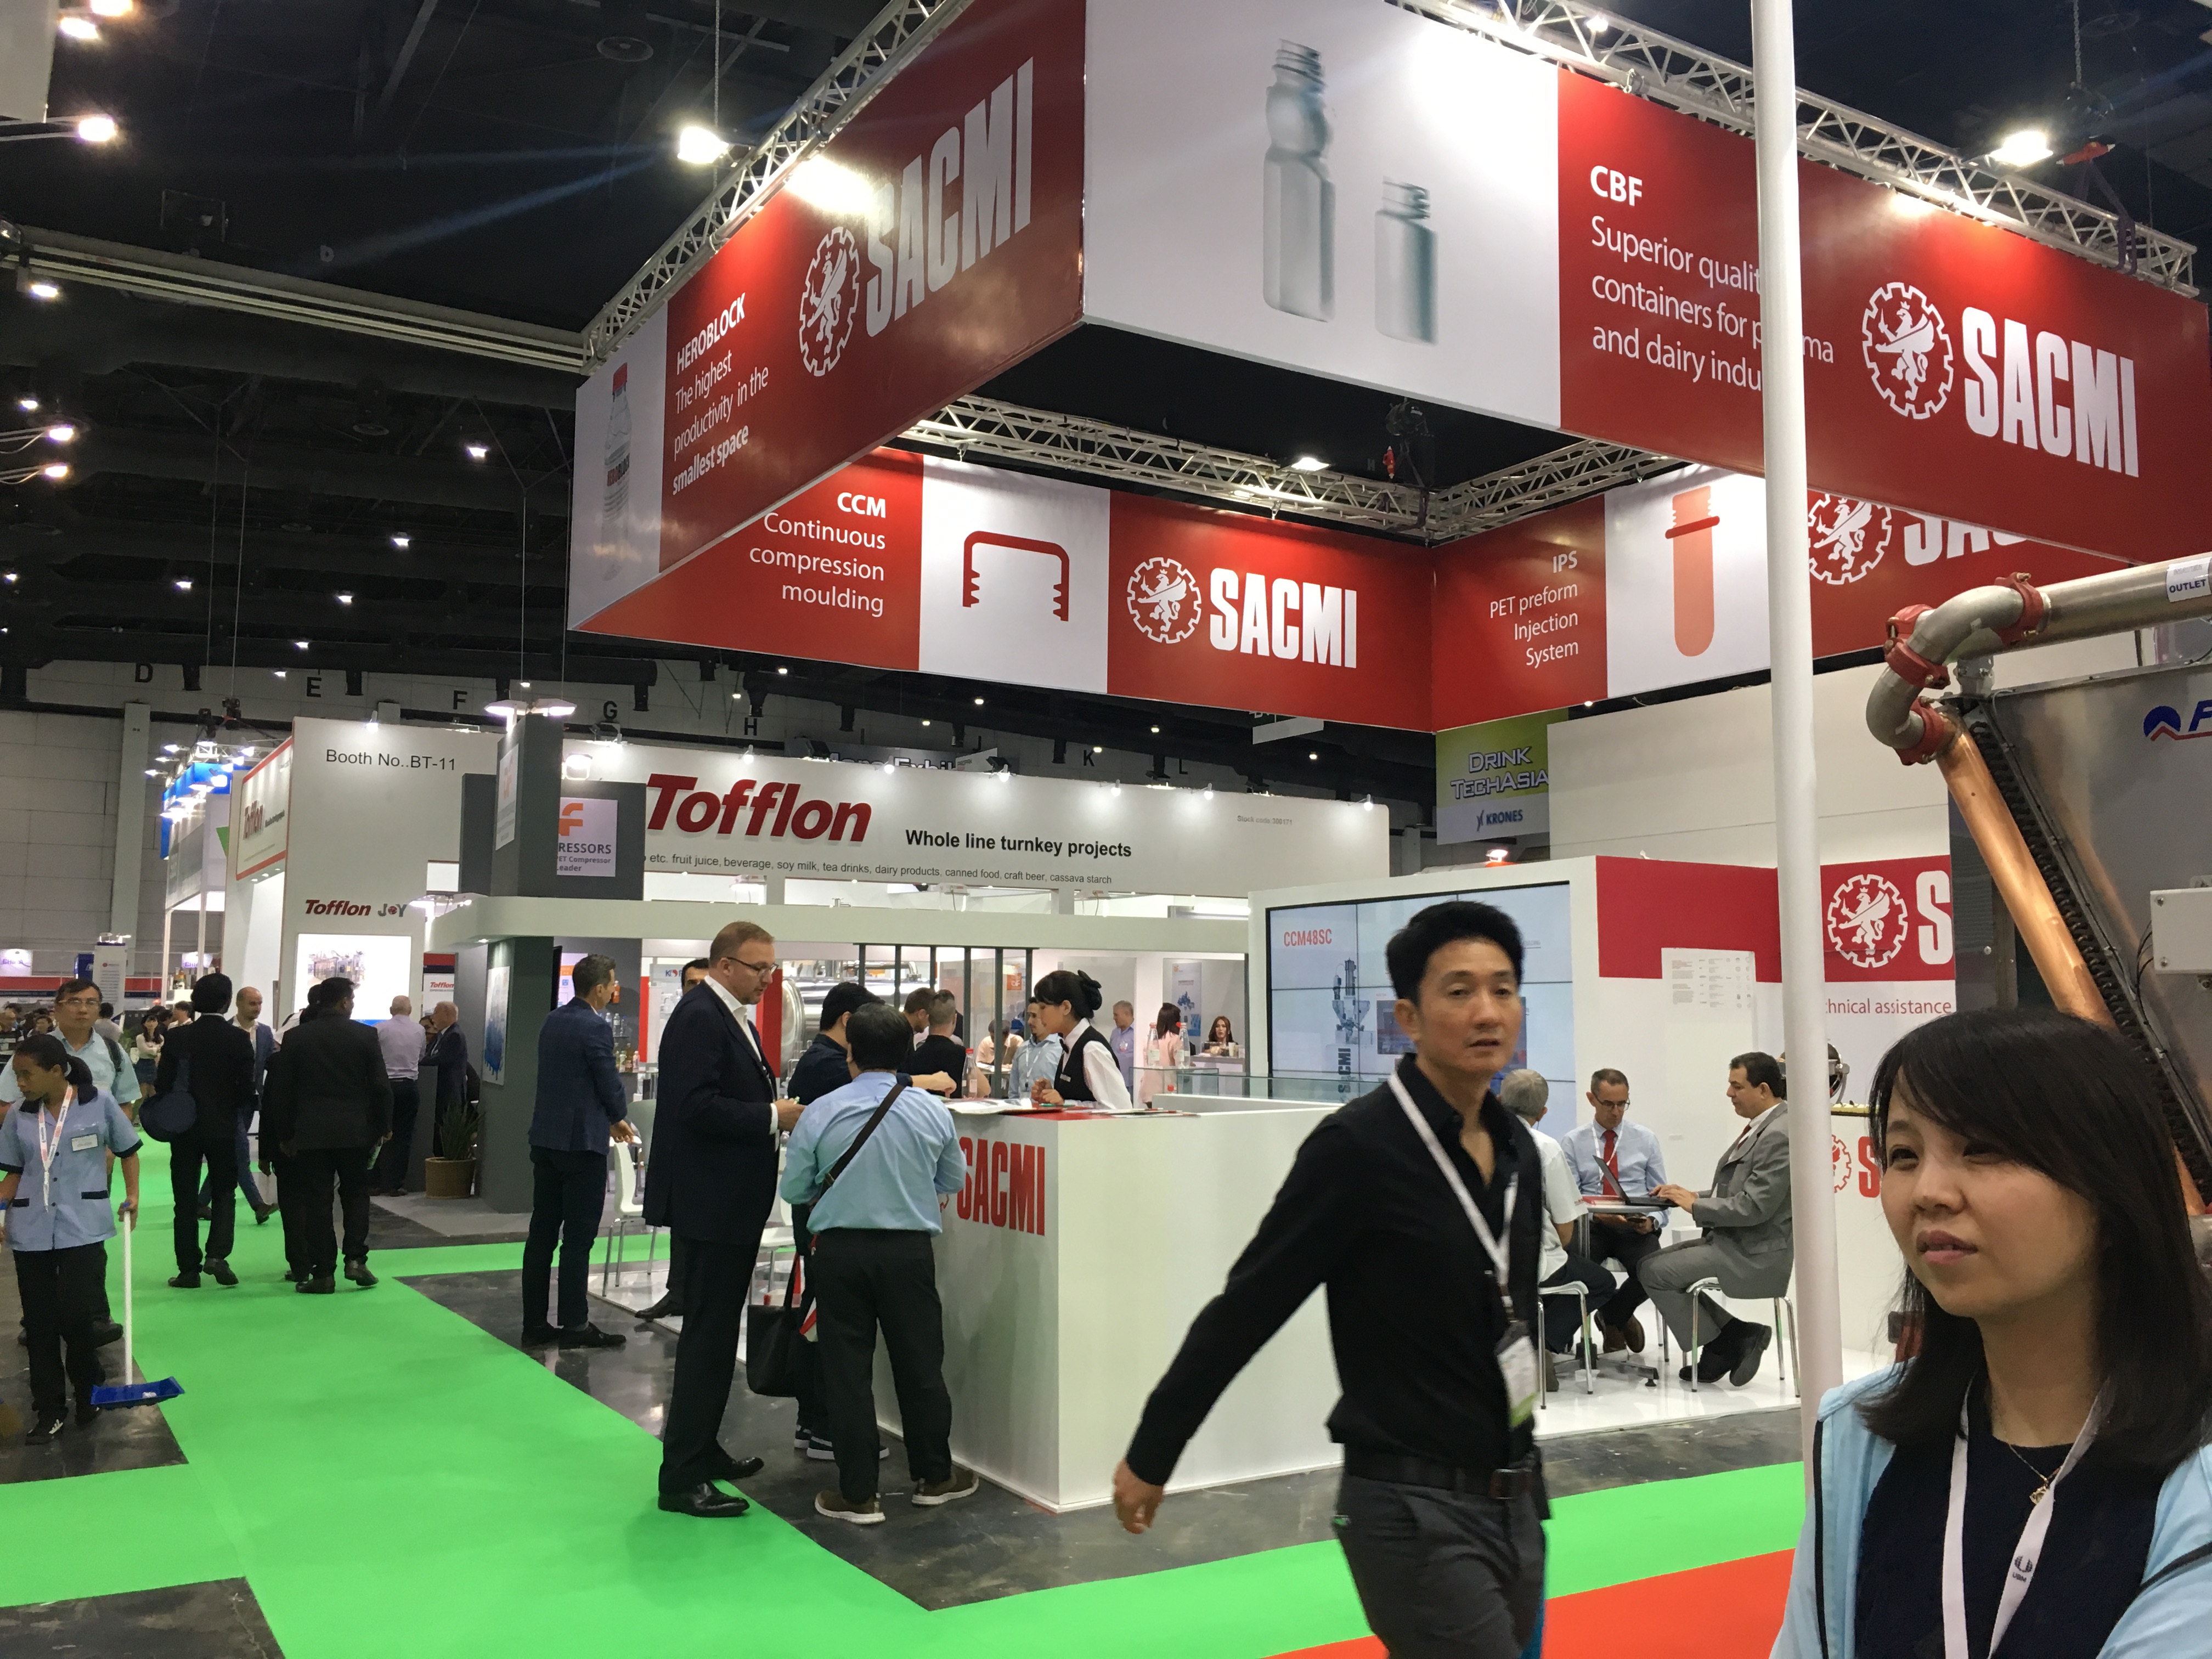 Propak Asia 2019, five good reasons to visit the SACMI stand